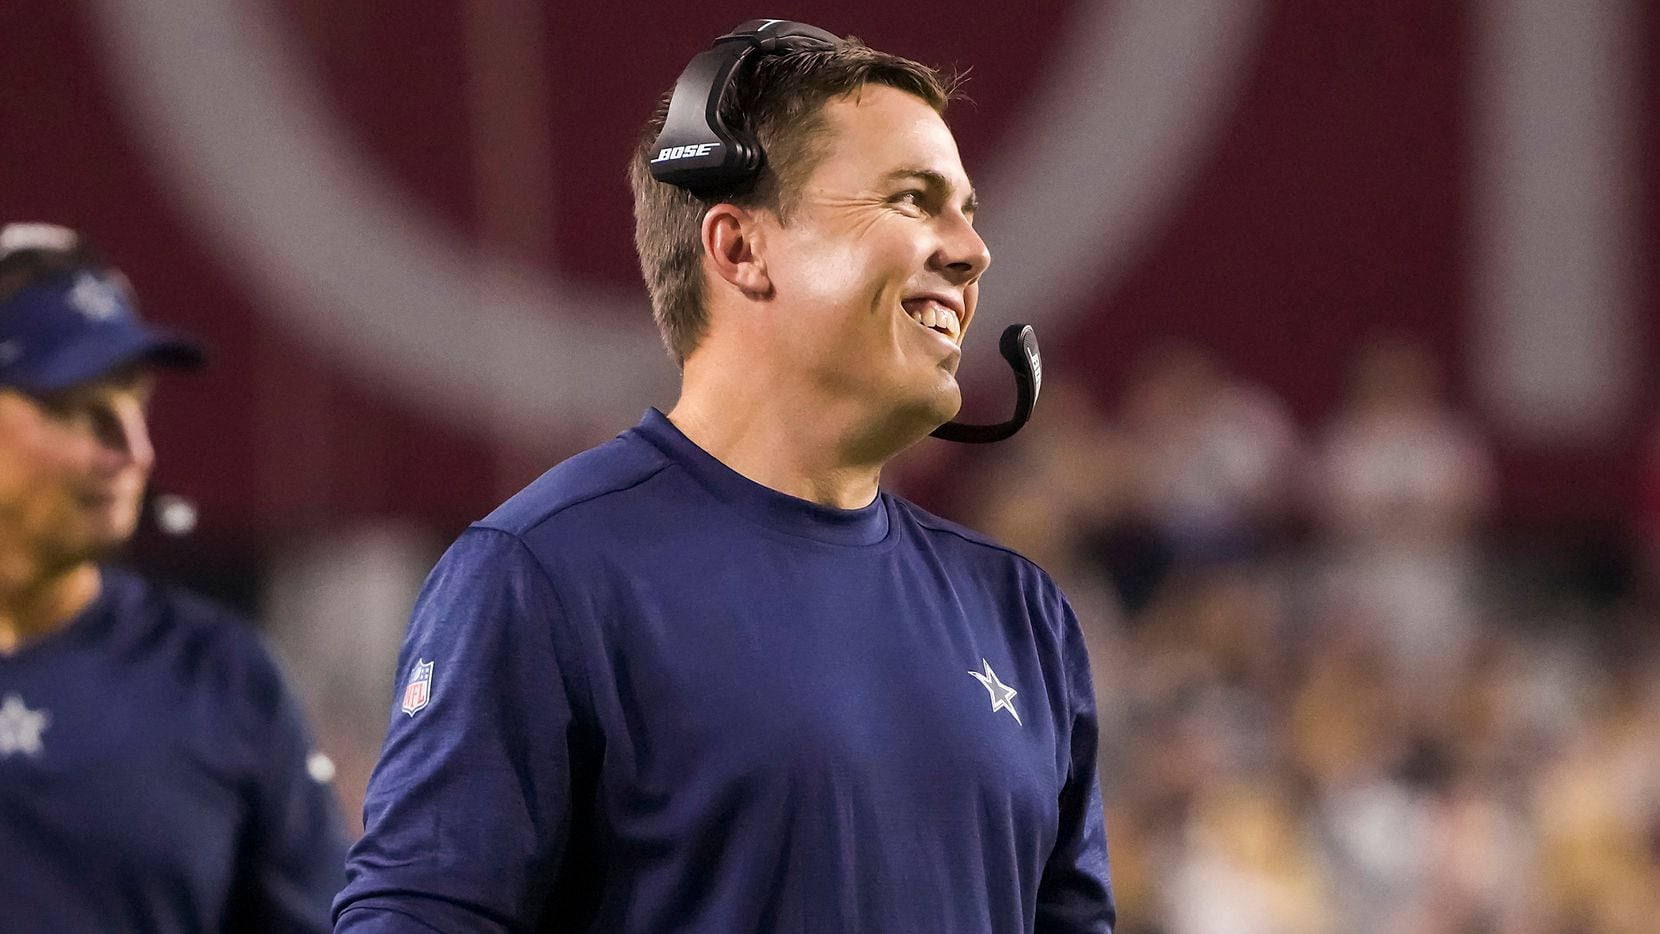 Dallas Cowboys offensive coordinator Kellen Moore smiles on the sidelines during the second half of a preseason NFL football game against the Arizona Cardinals at State Farm Stadium on Friday, Aug. 13, 2021, in Glendale, Ariz.